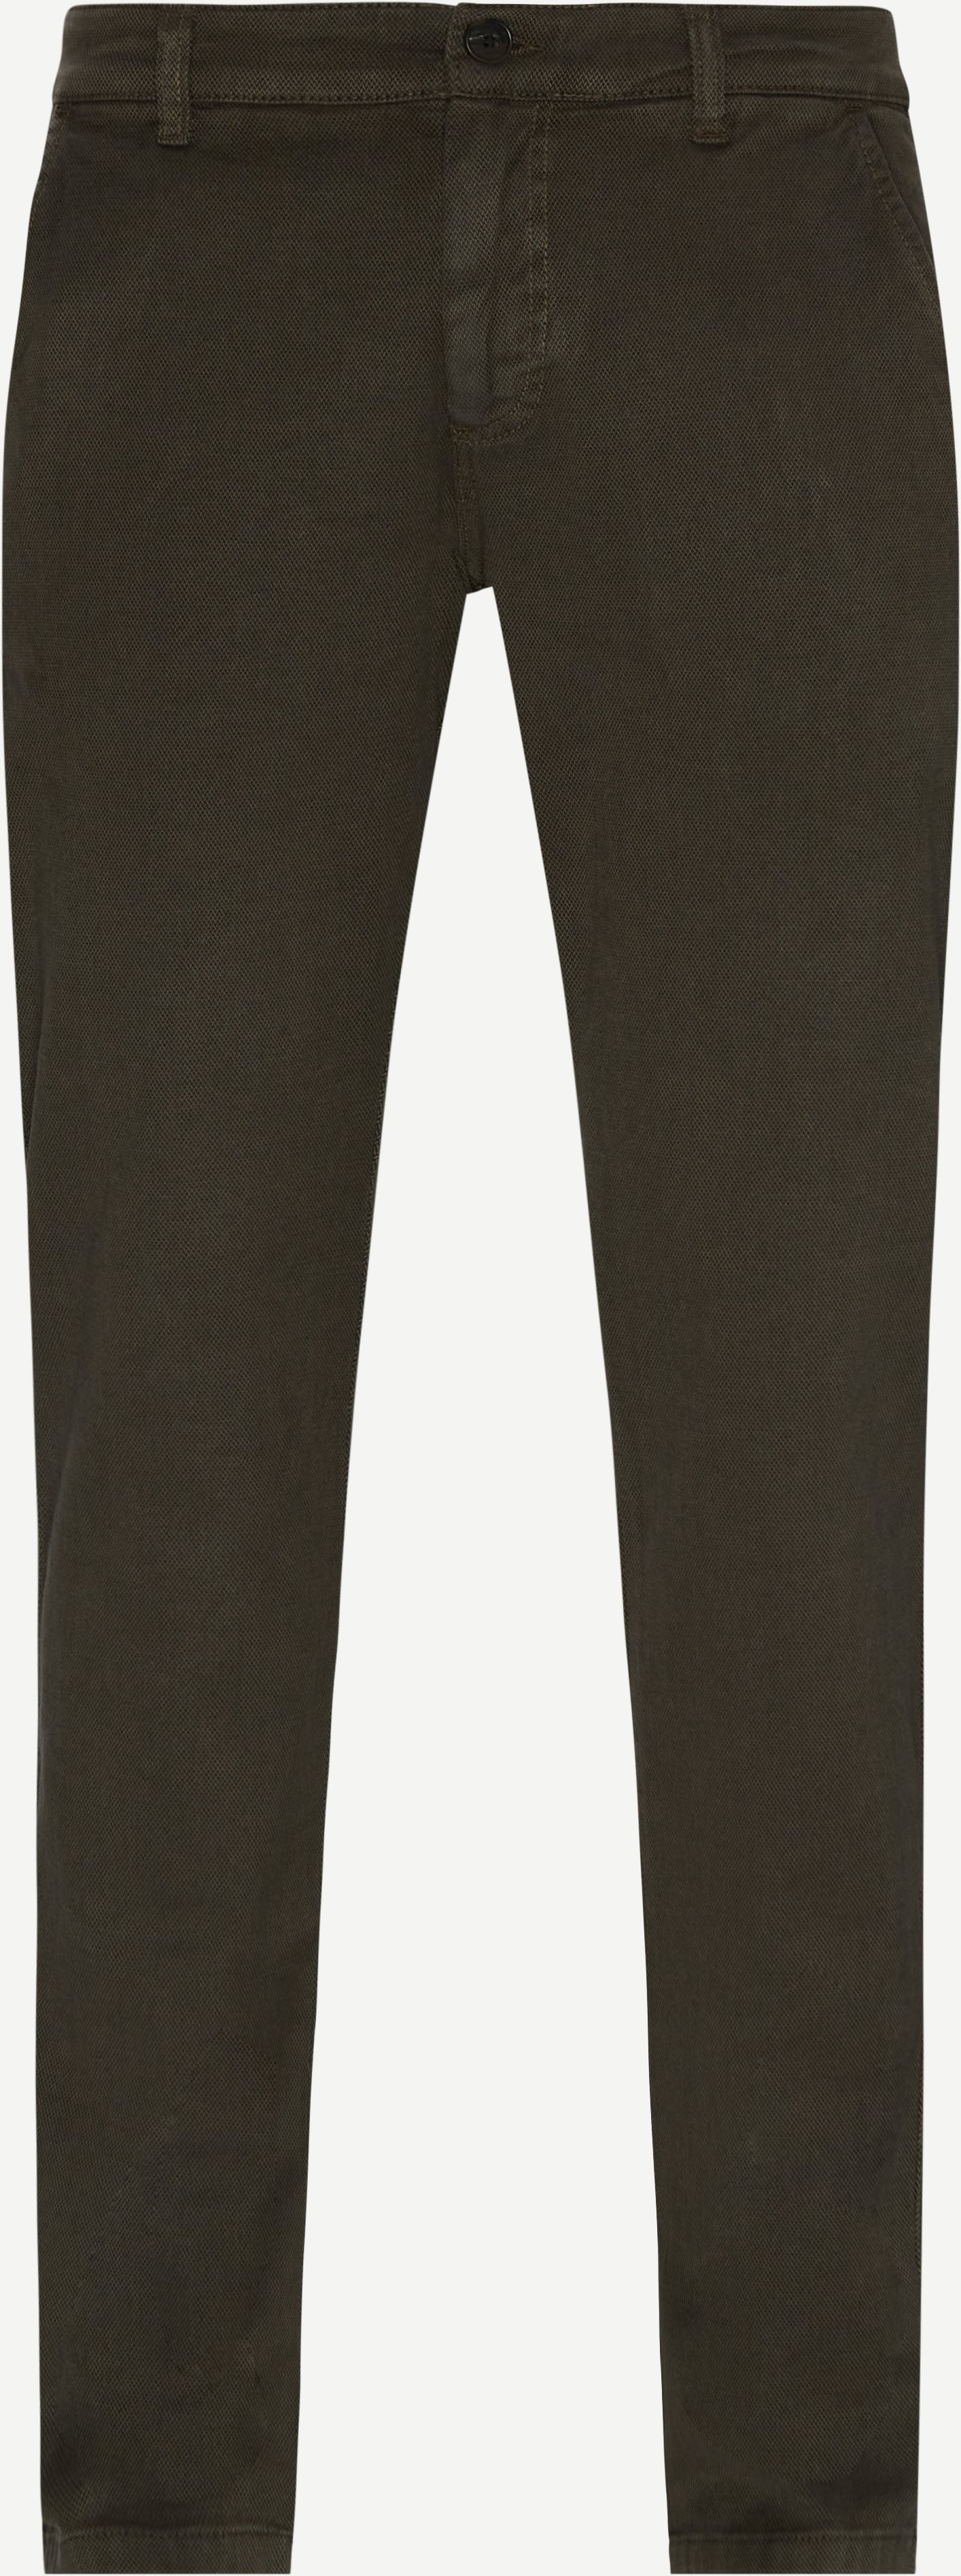 Brett Structure Chinos - Trousers - Regular fit - Army